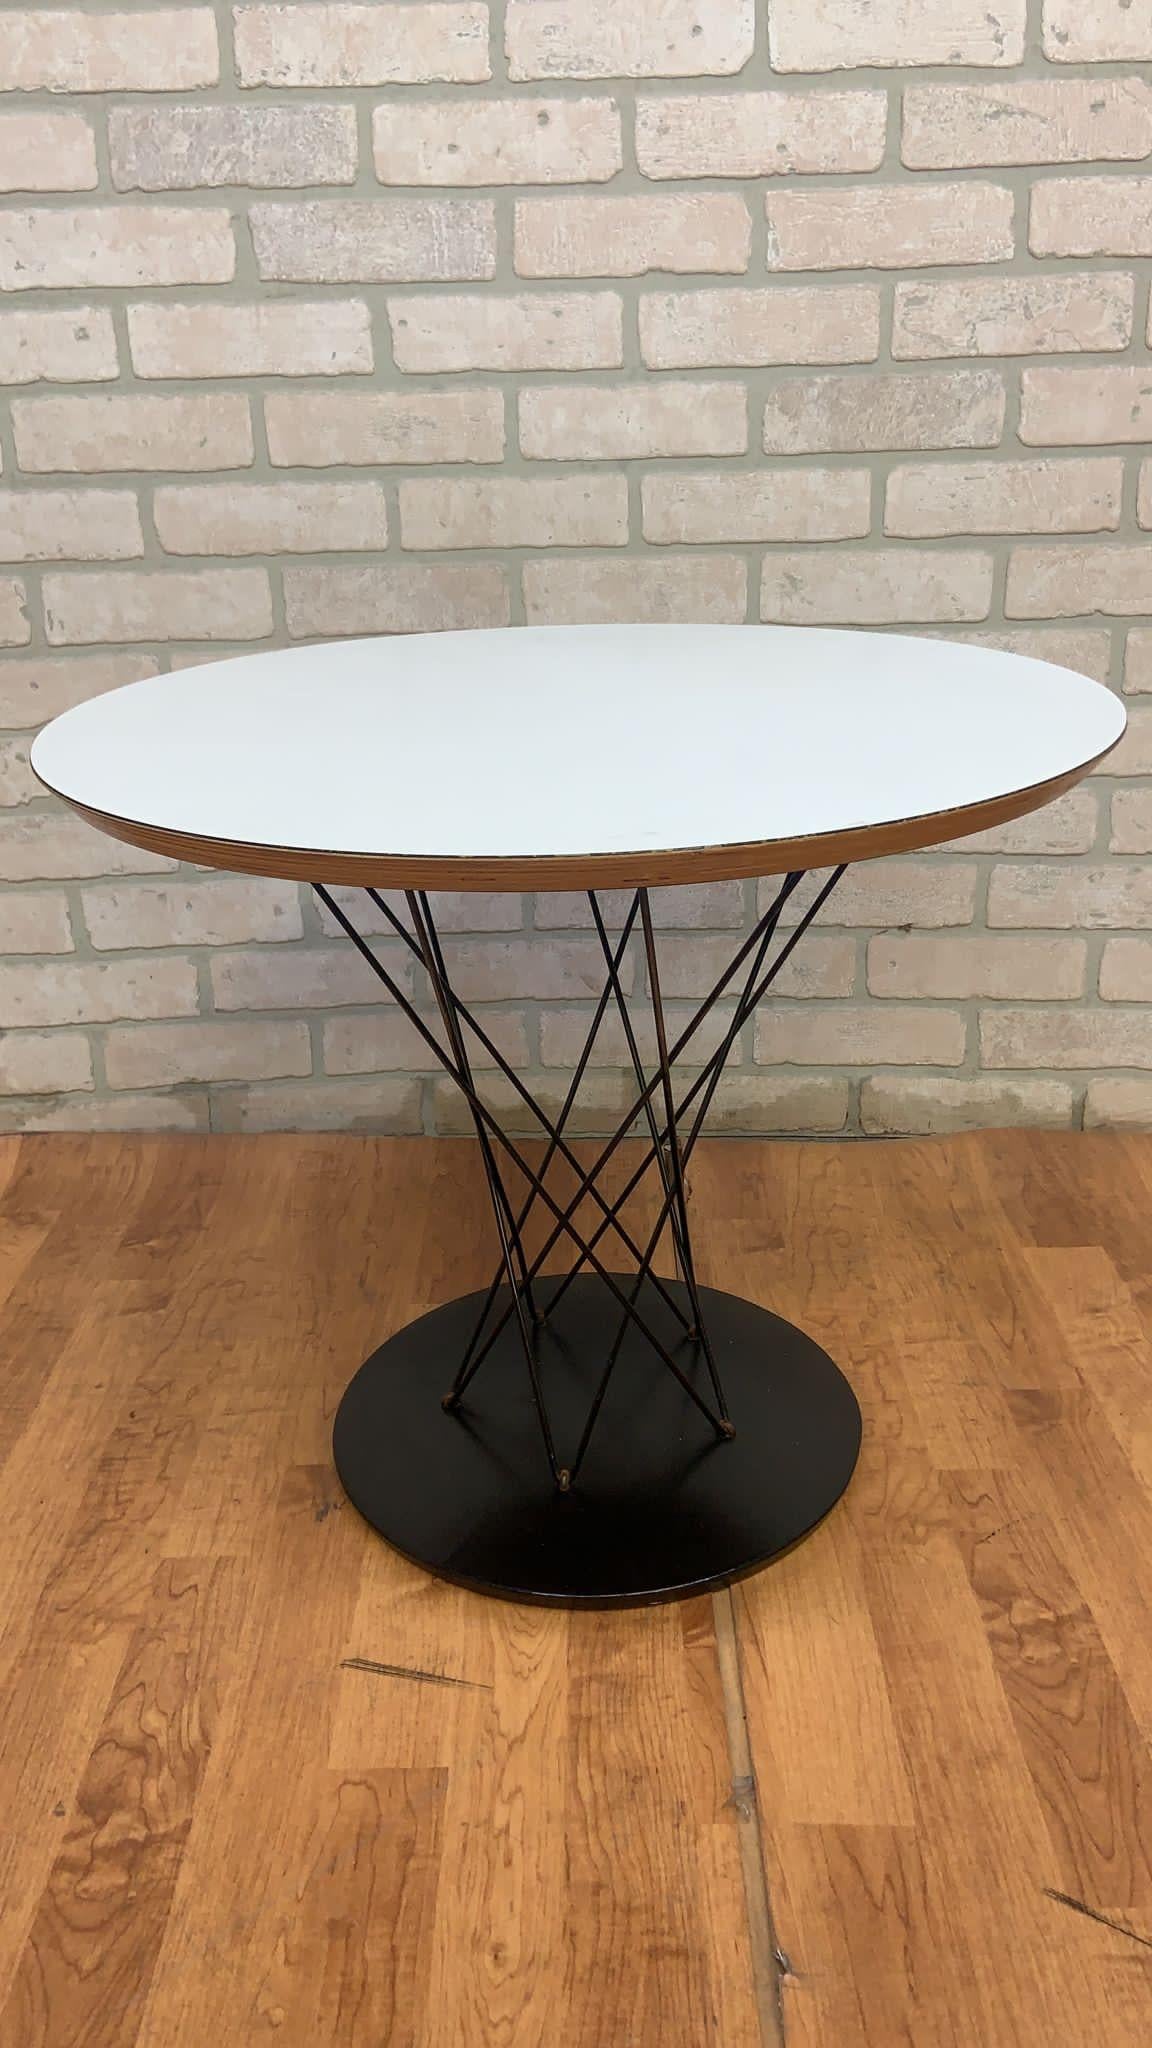 Vintage Mid Century Modern Isamu Noguchi Cyclone Side Table

This mid century modern side table has an eye-catching steel wire silhouette and cast-iron black base. The top is a birch plywood with a white laminate finish and a natural birch